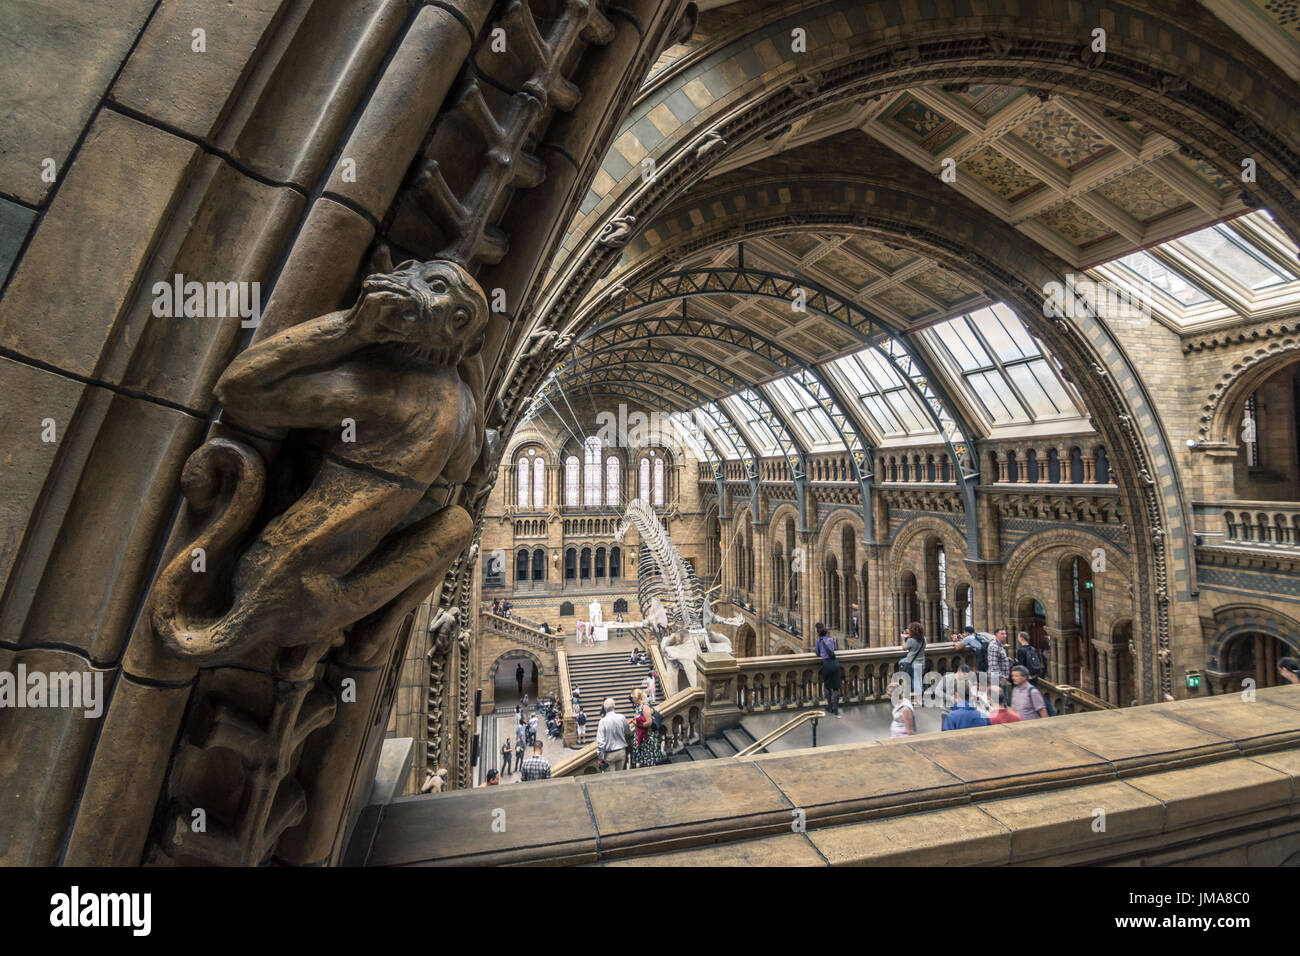 London, UK - July 25, People visiting the new Hintze hall in the Natural History Museum featuring a blue whale skeleton Stock Photo